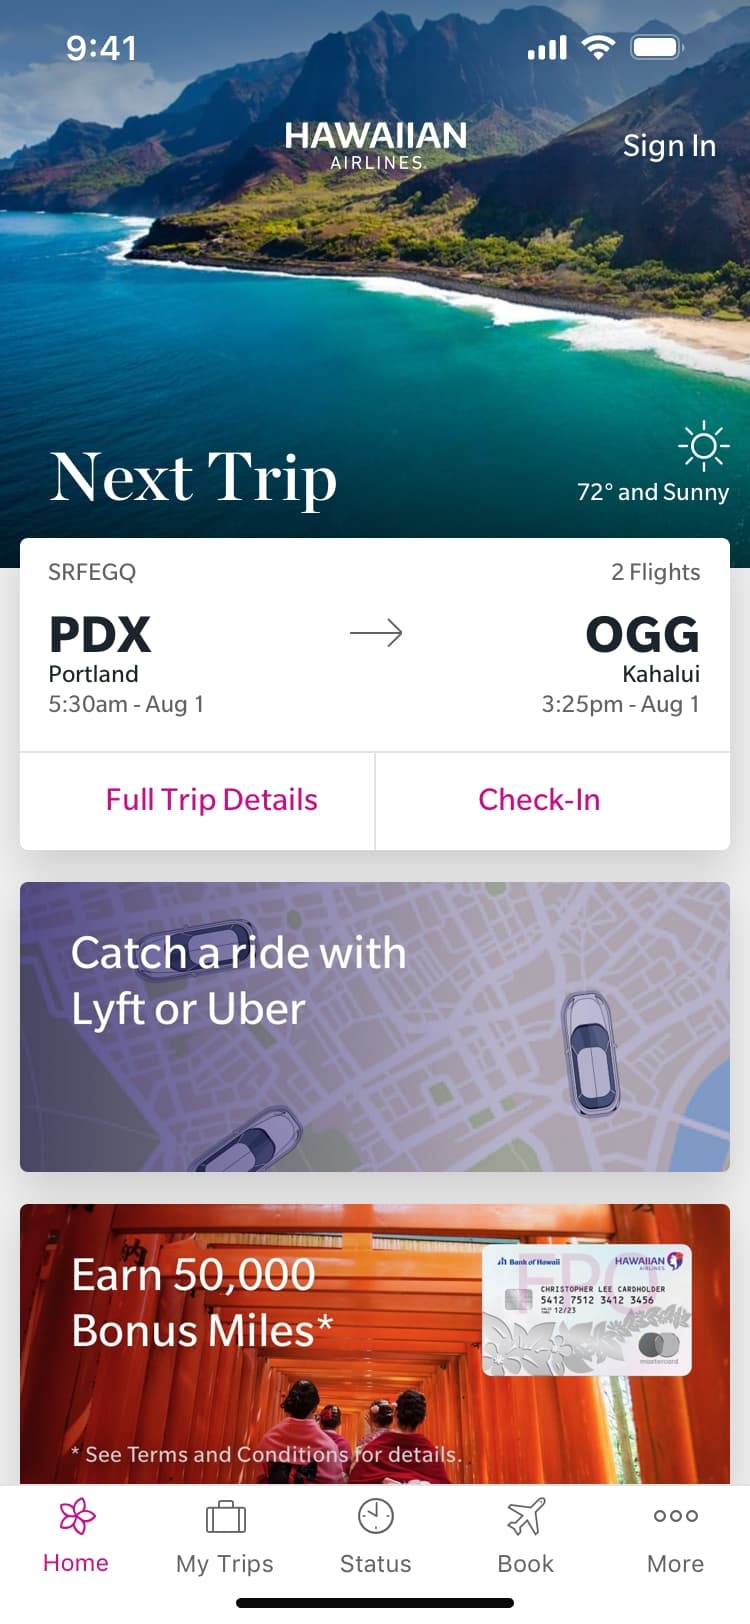 A smartphone screen showing the Hawaiian Airlines app with a trip from Portland (PDX) to Kahului (OGG) details, option to check-in, and various promotional offers.